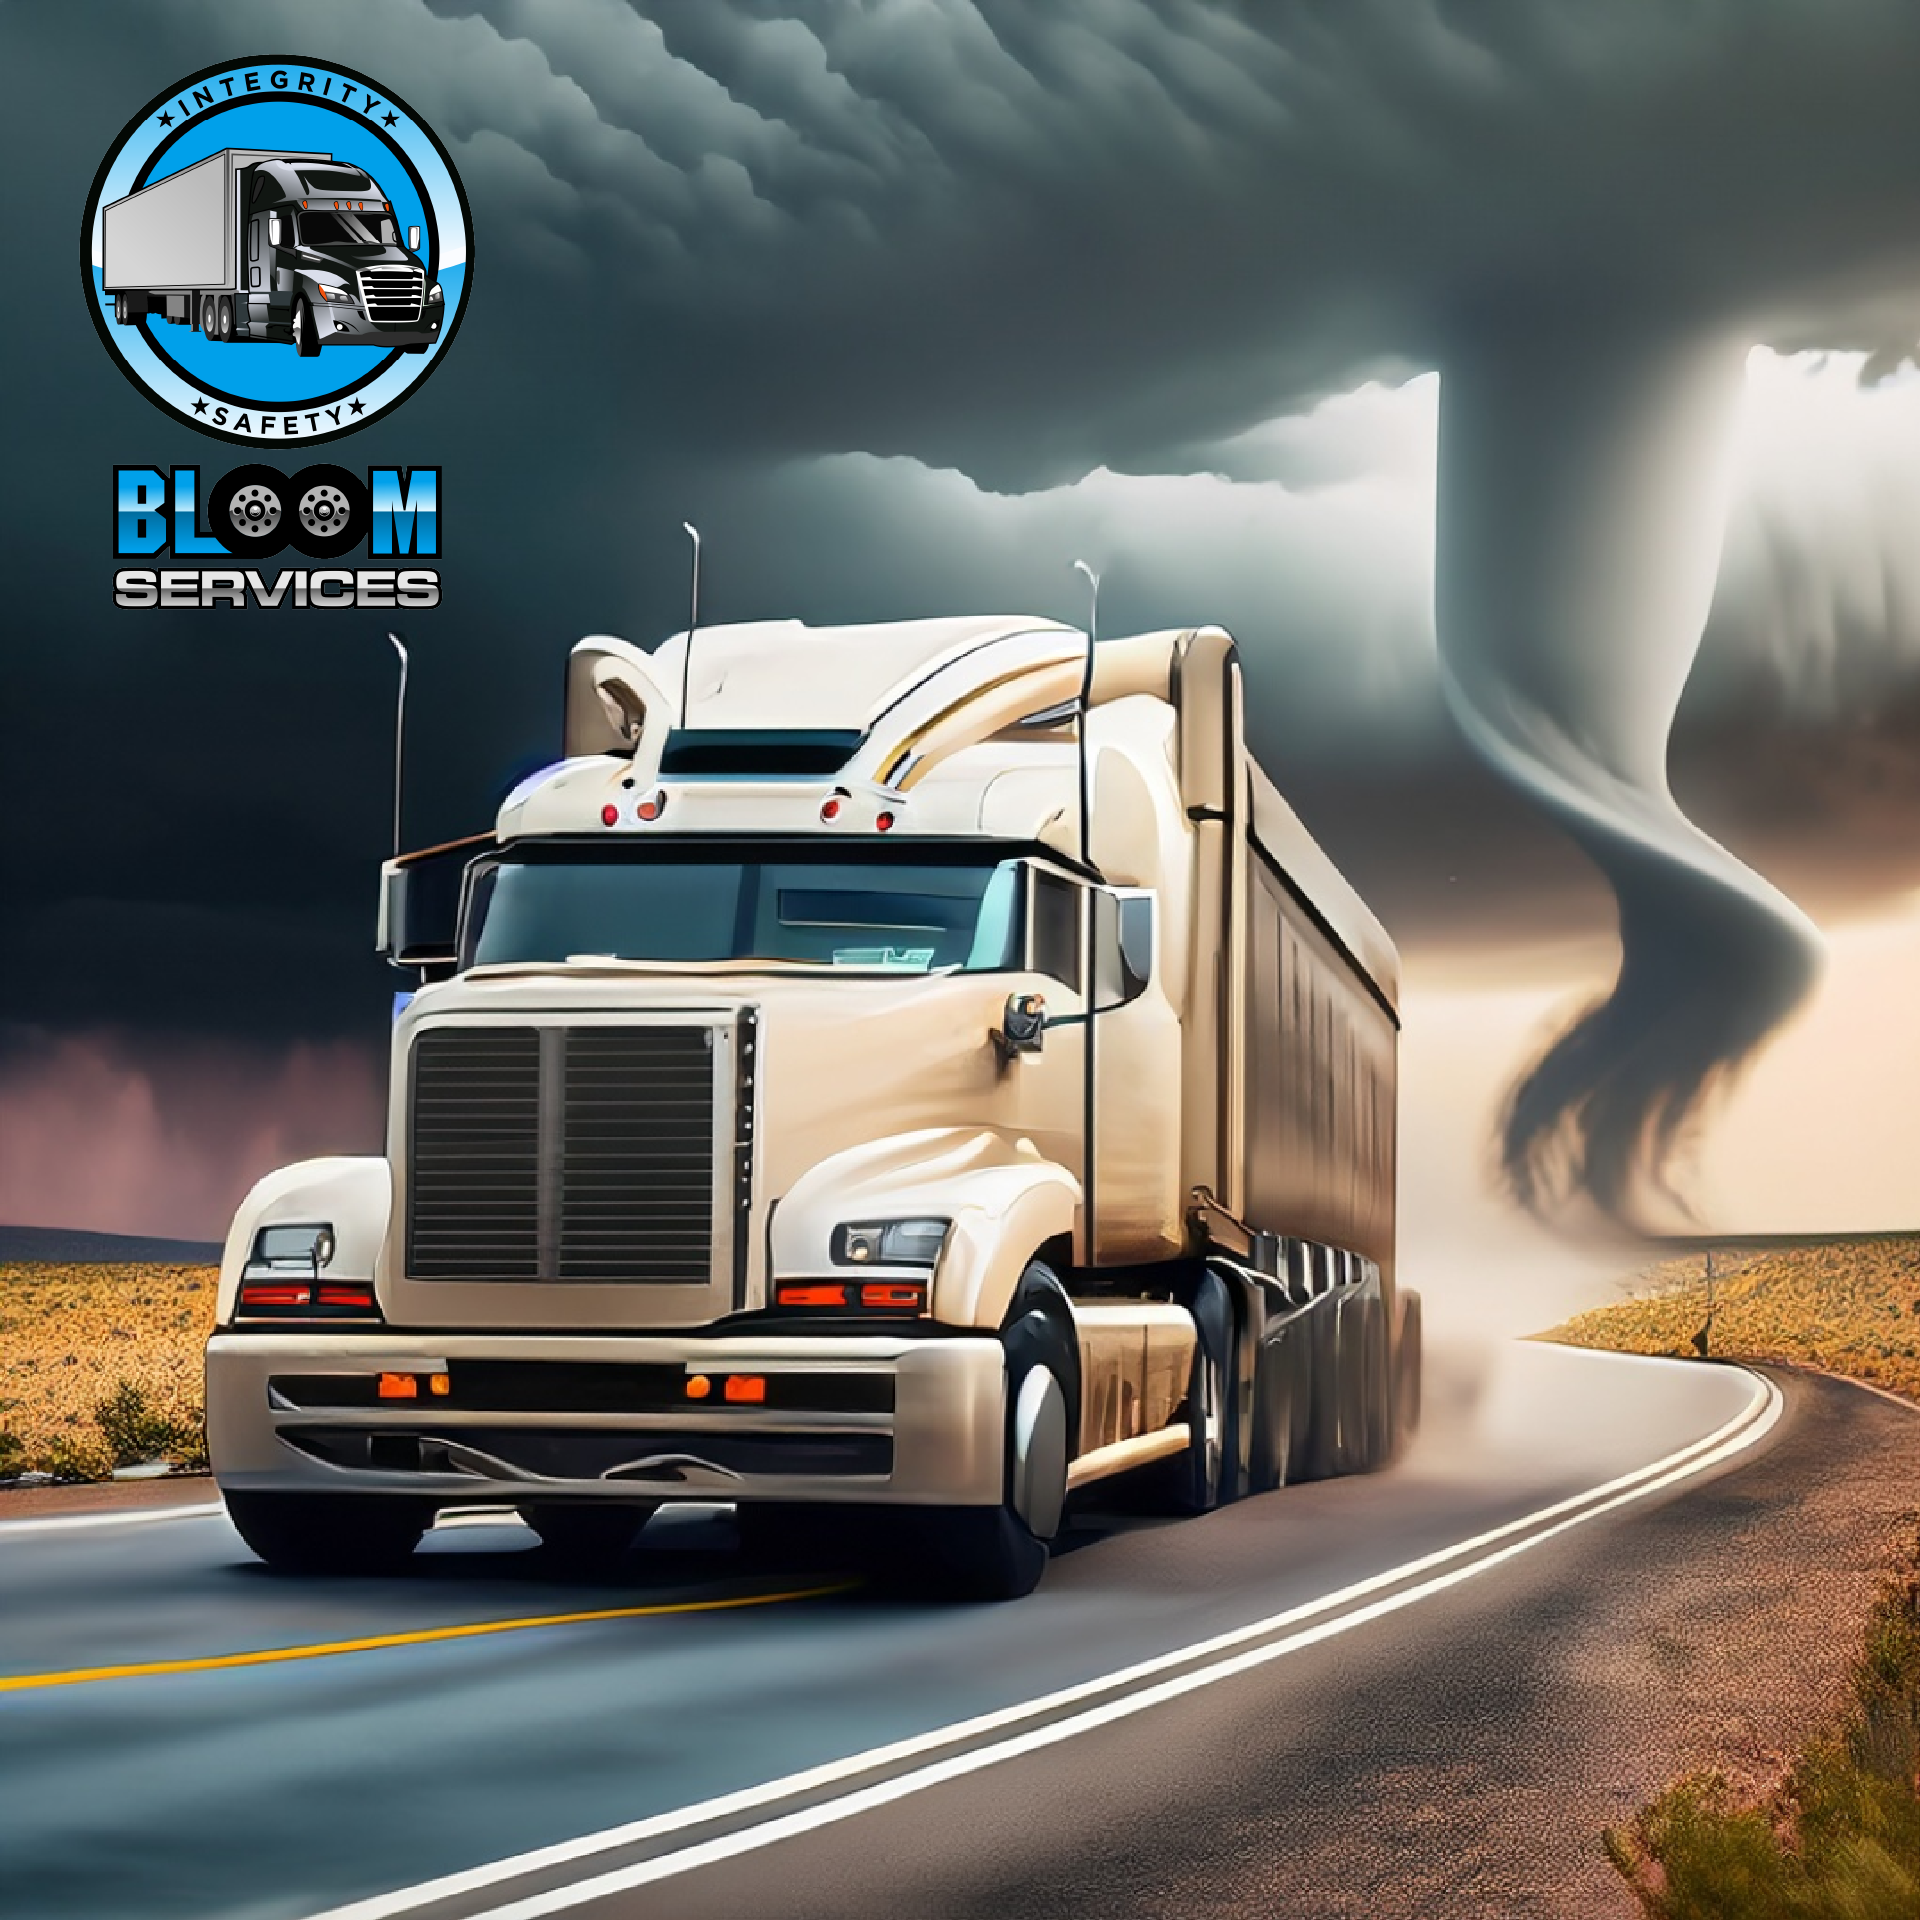 A semi truck is driving down a road with a tornado and bloom services in the background